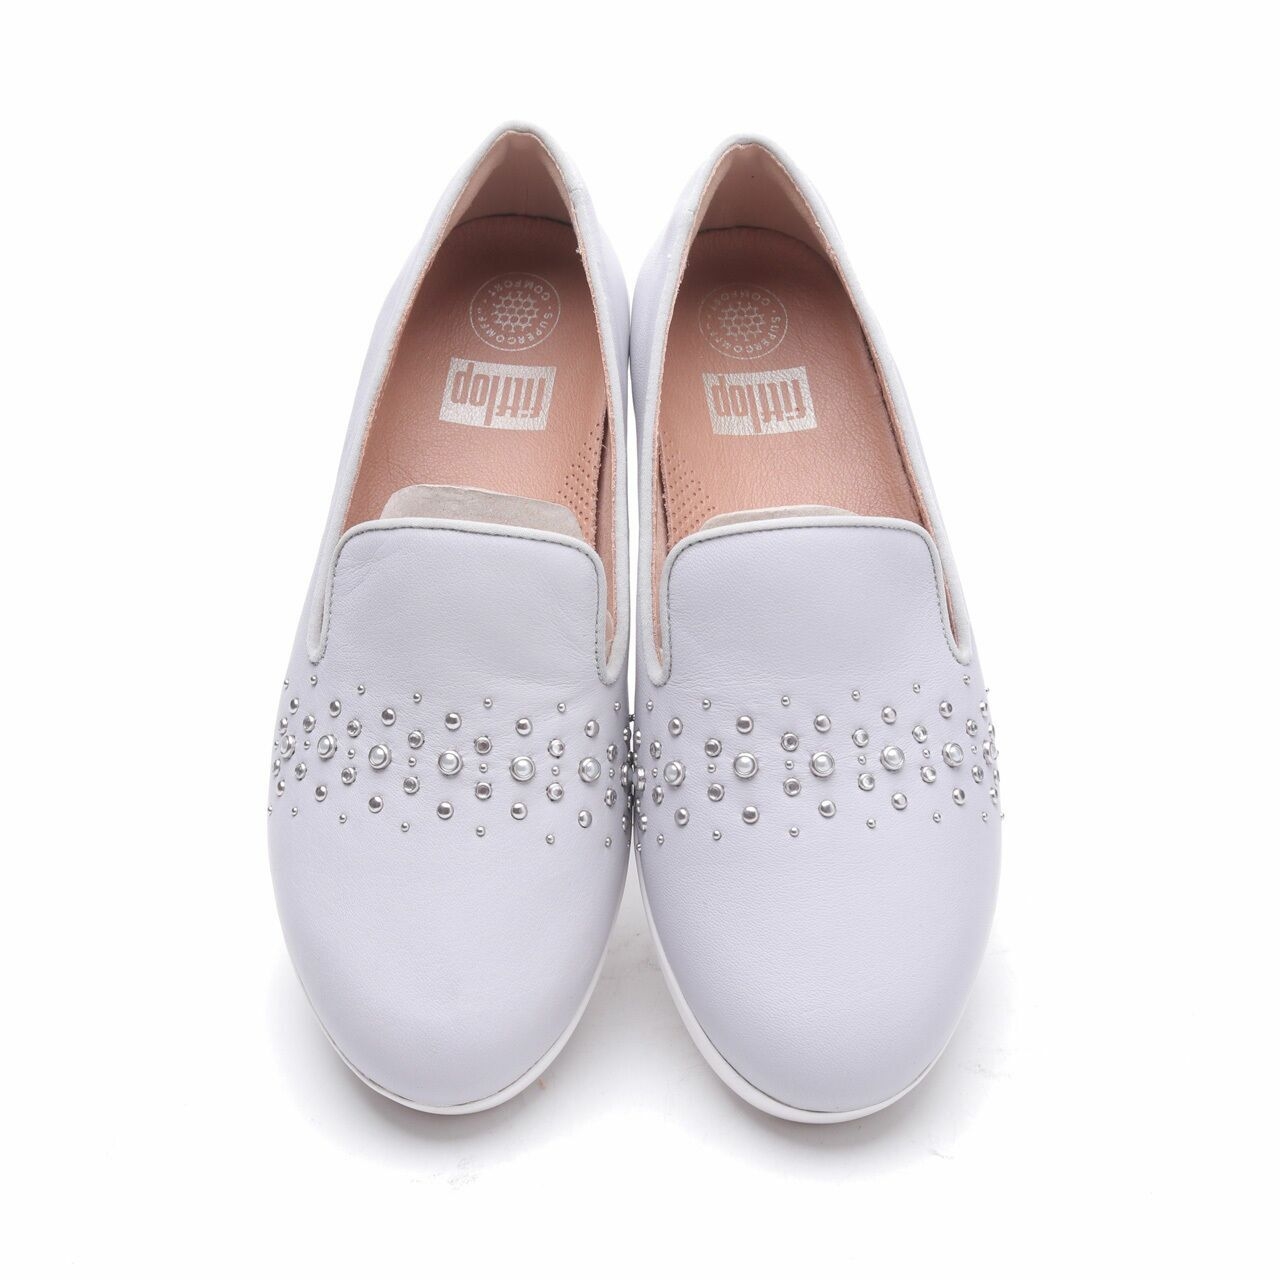 Fitflop Audrey Pearl Stud Smoking Slippers Flats